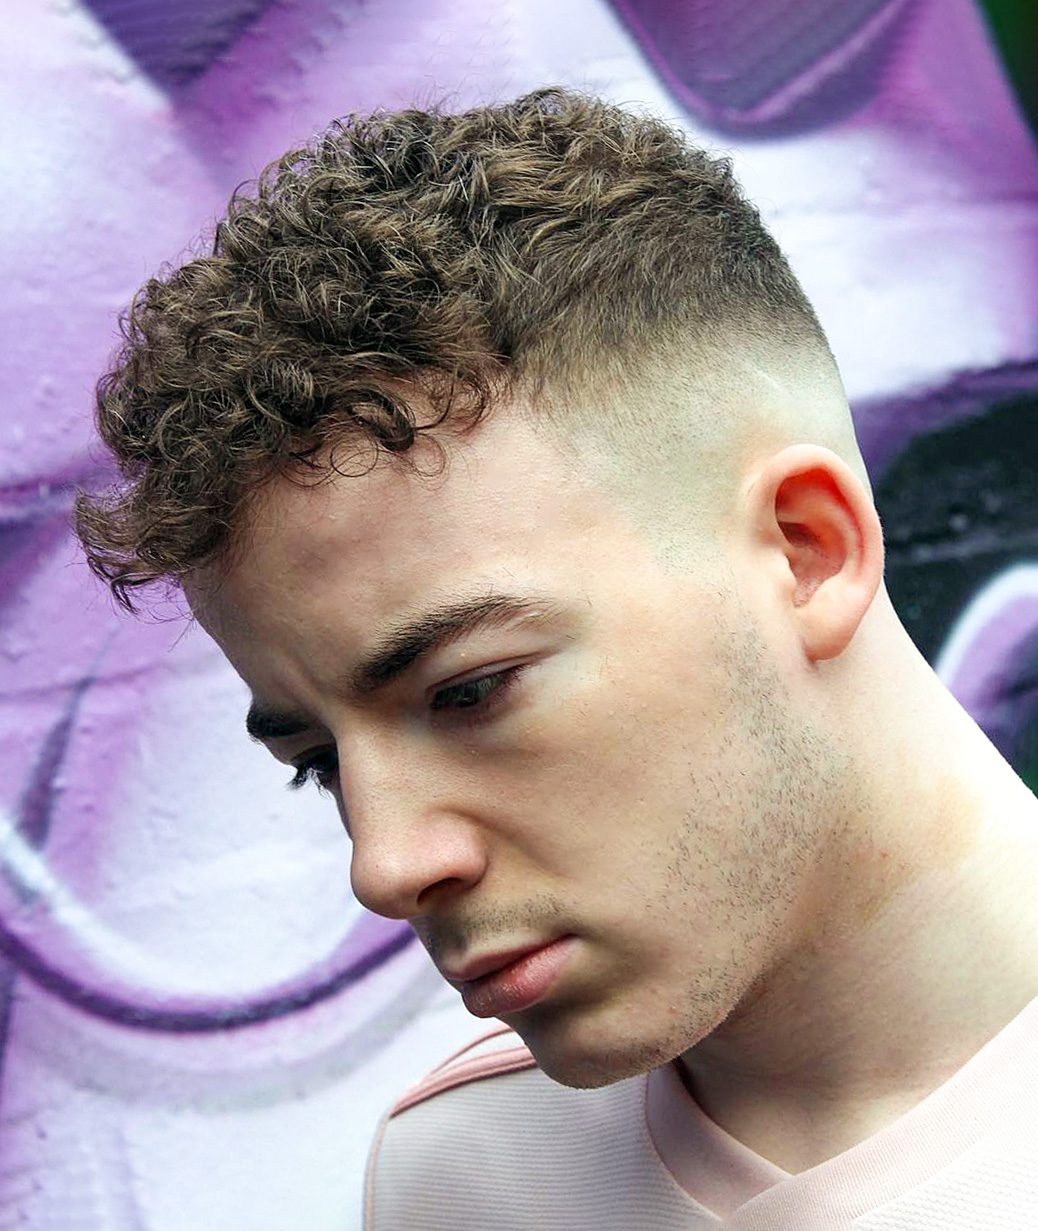 50 Modern Men's Hairstyles for Curly Hair (That Will Change Your Look)